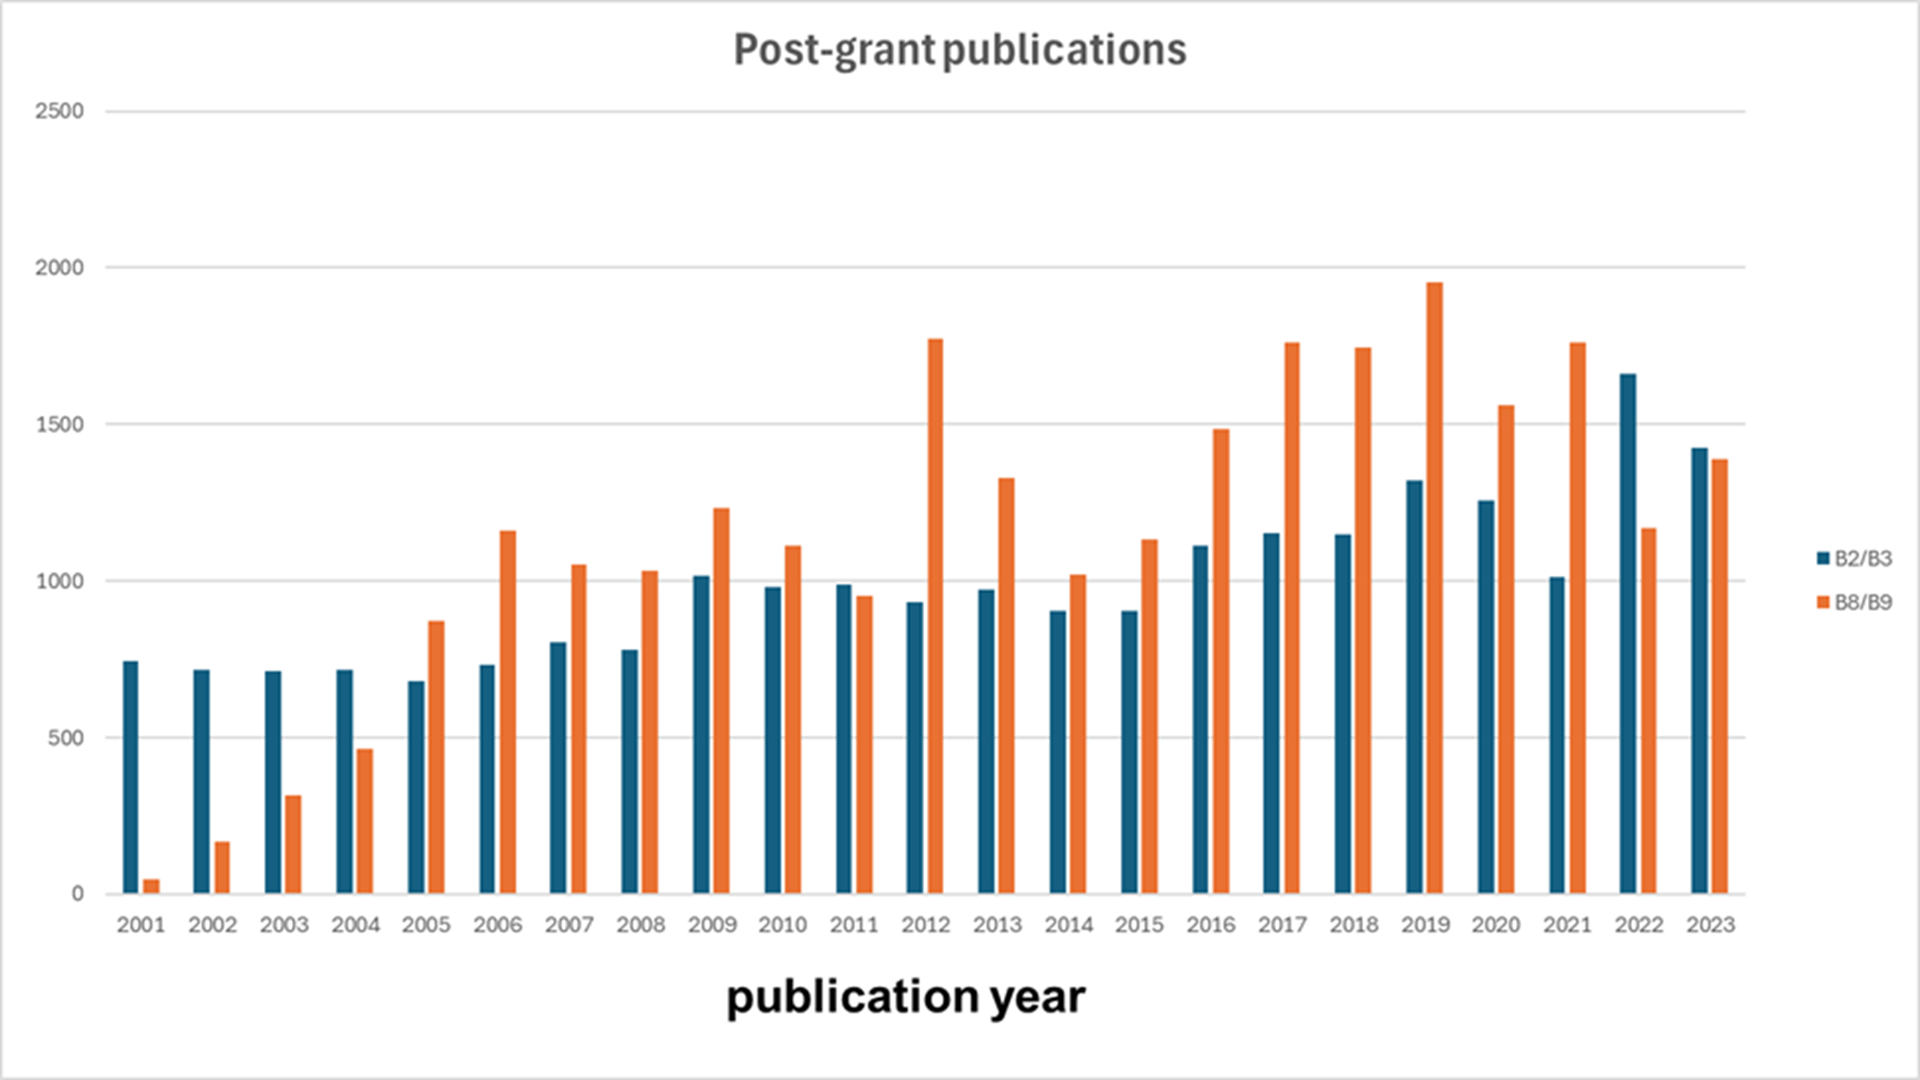 Number of B2/B3 and B8/B9 publications by publication year  